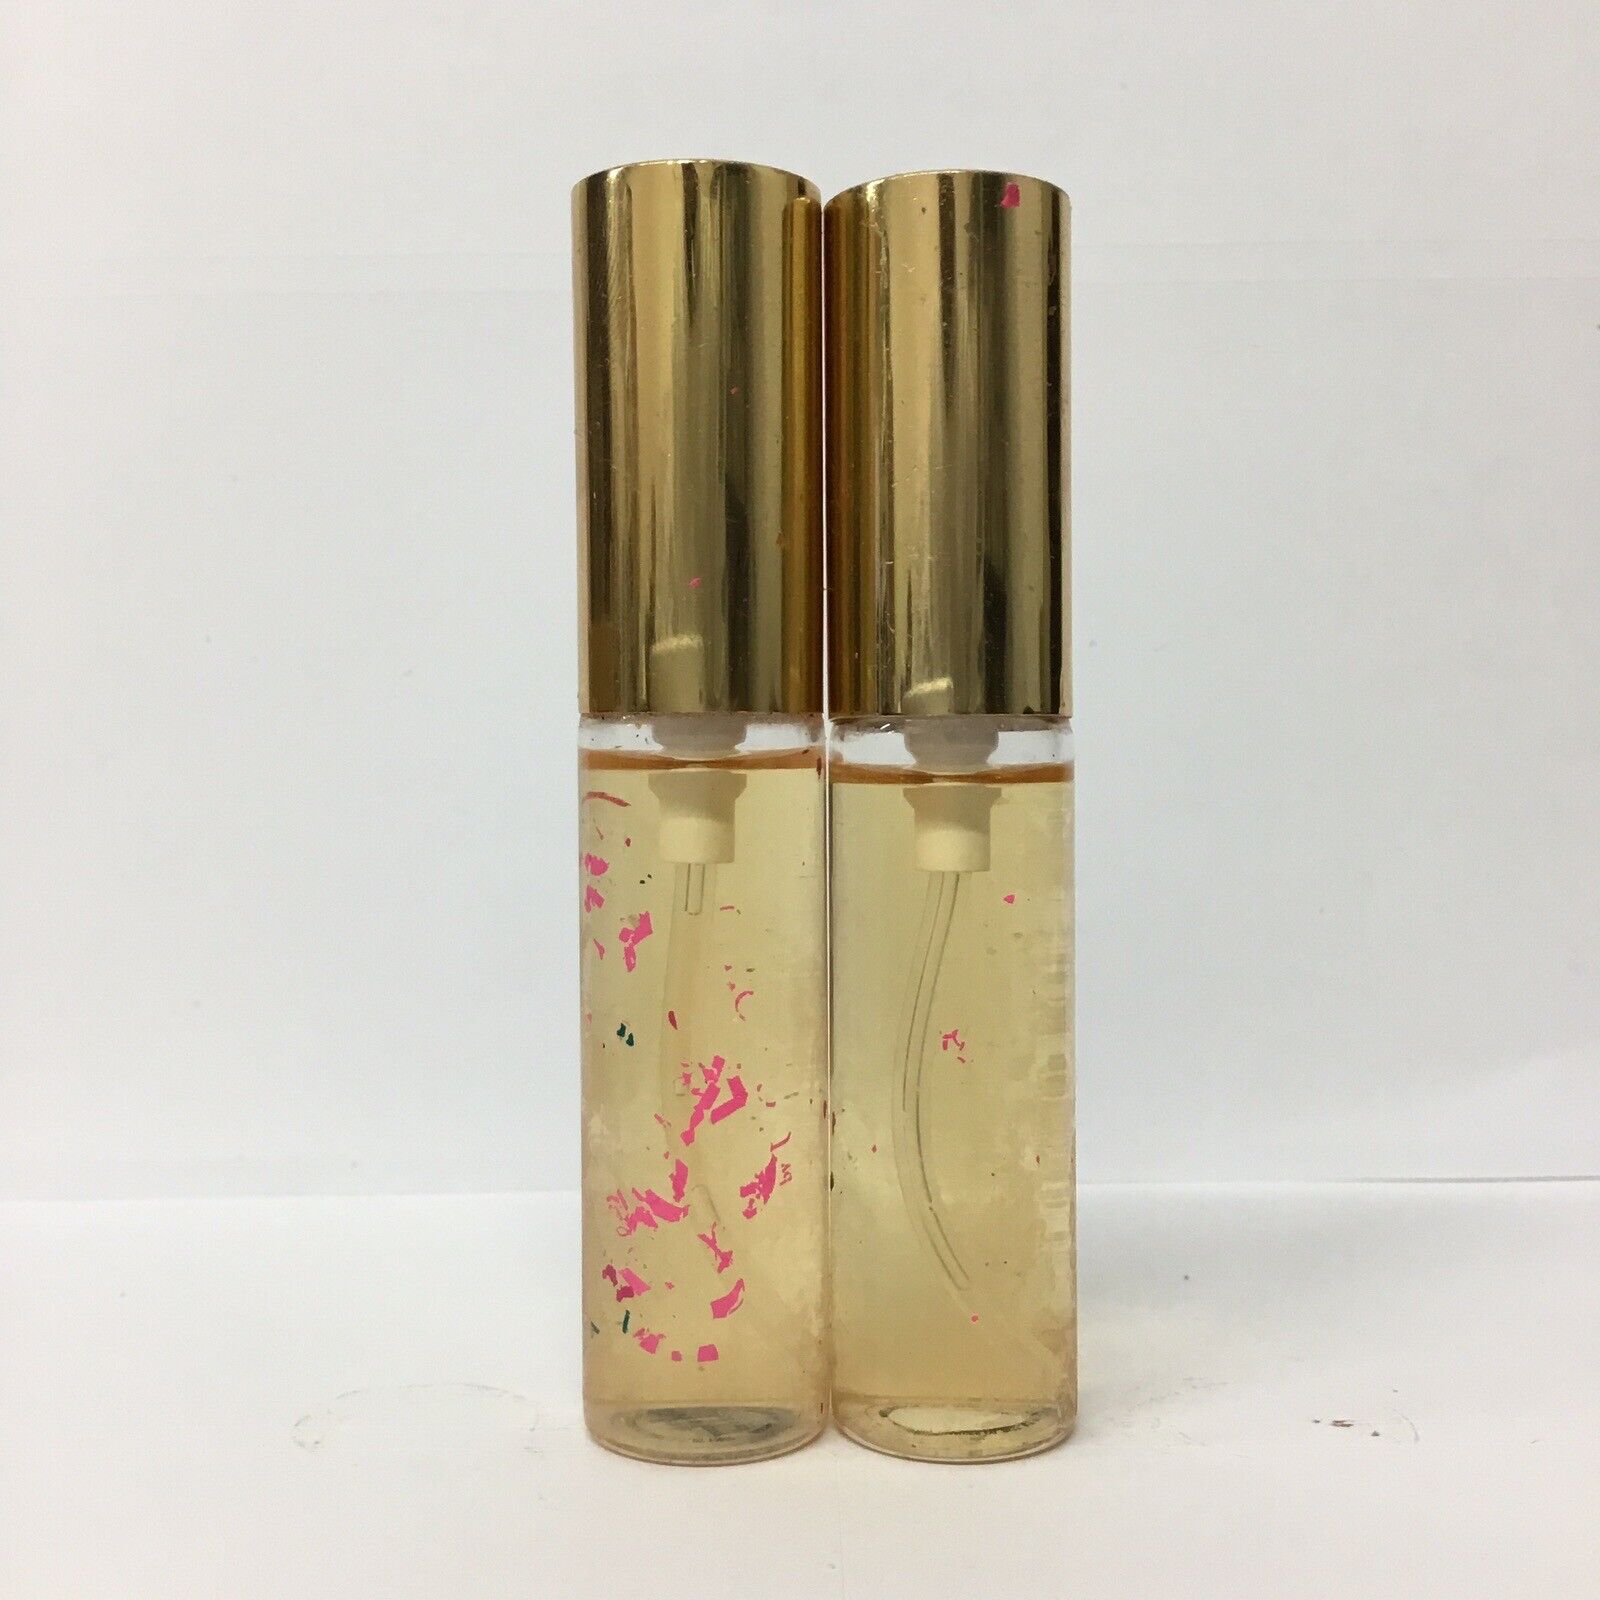 Lot of 2 Couture Couture By Juicy Couture Eau de Parfum Spray .3oz - As Pictured